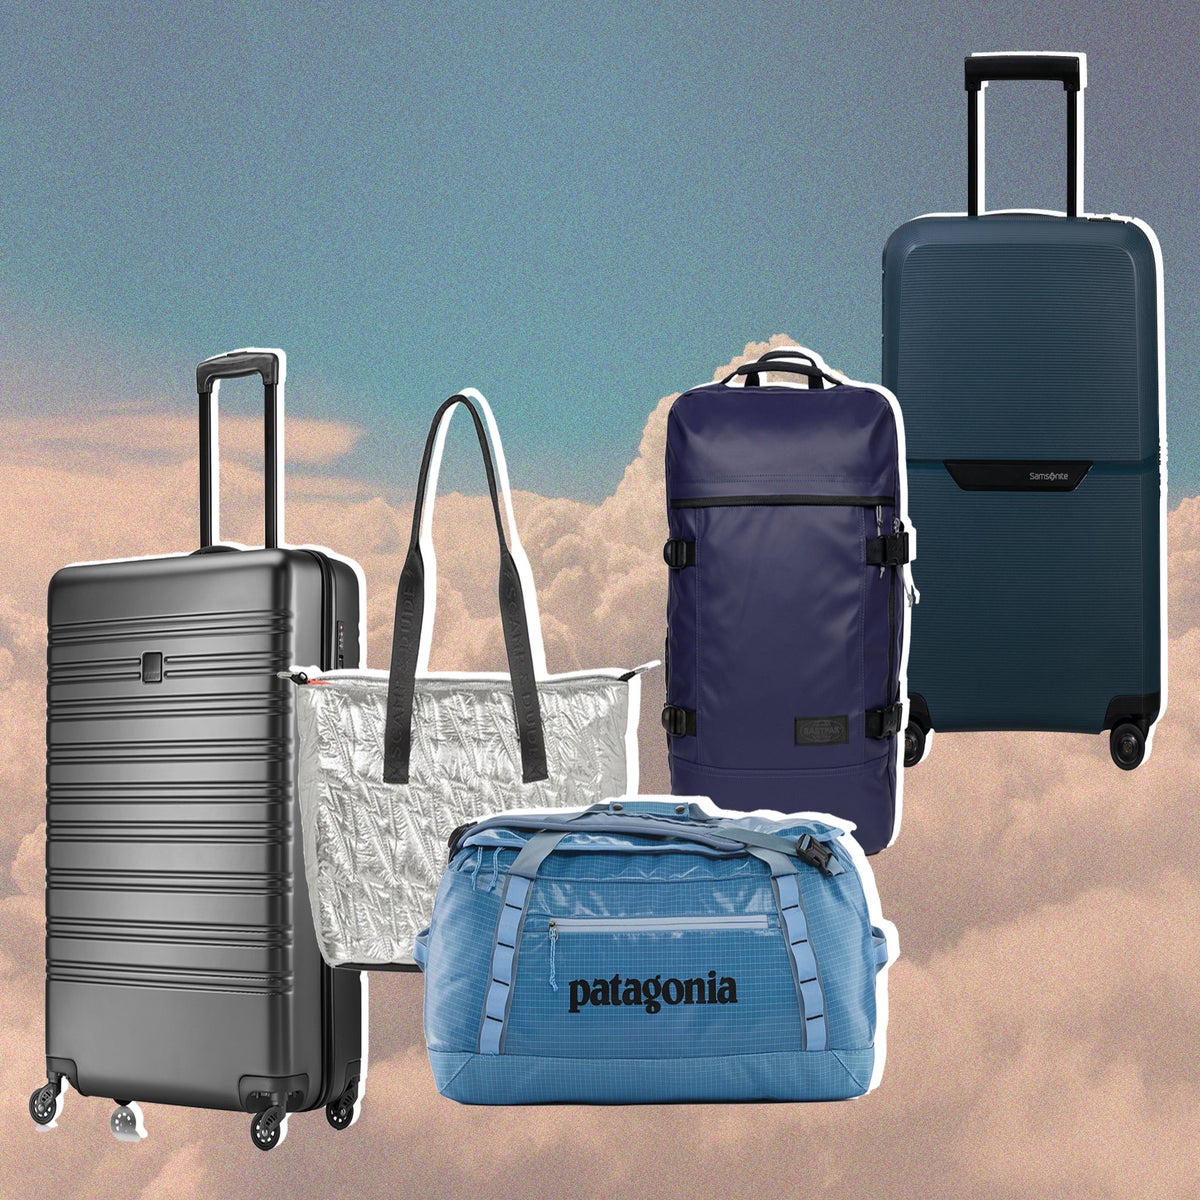 Cabin Zero bag review: the ultimate hand luggage? - MUMMYTRAVELS